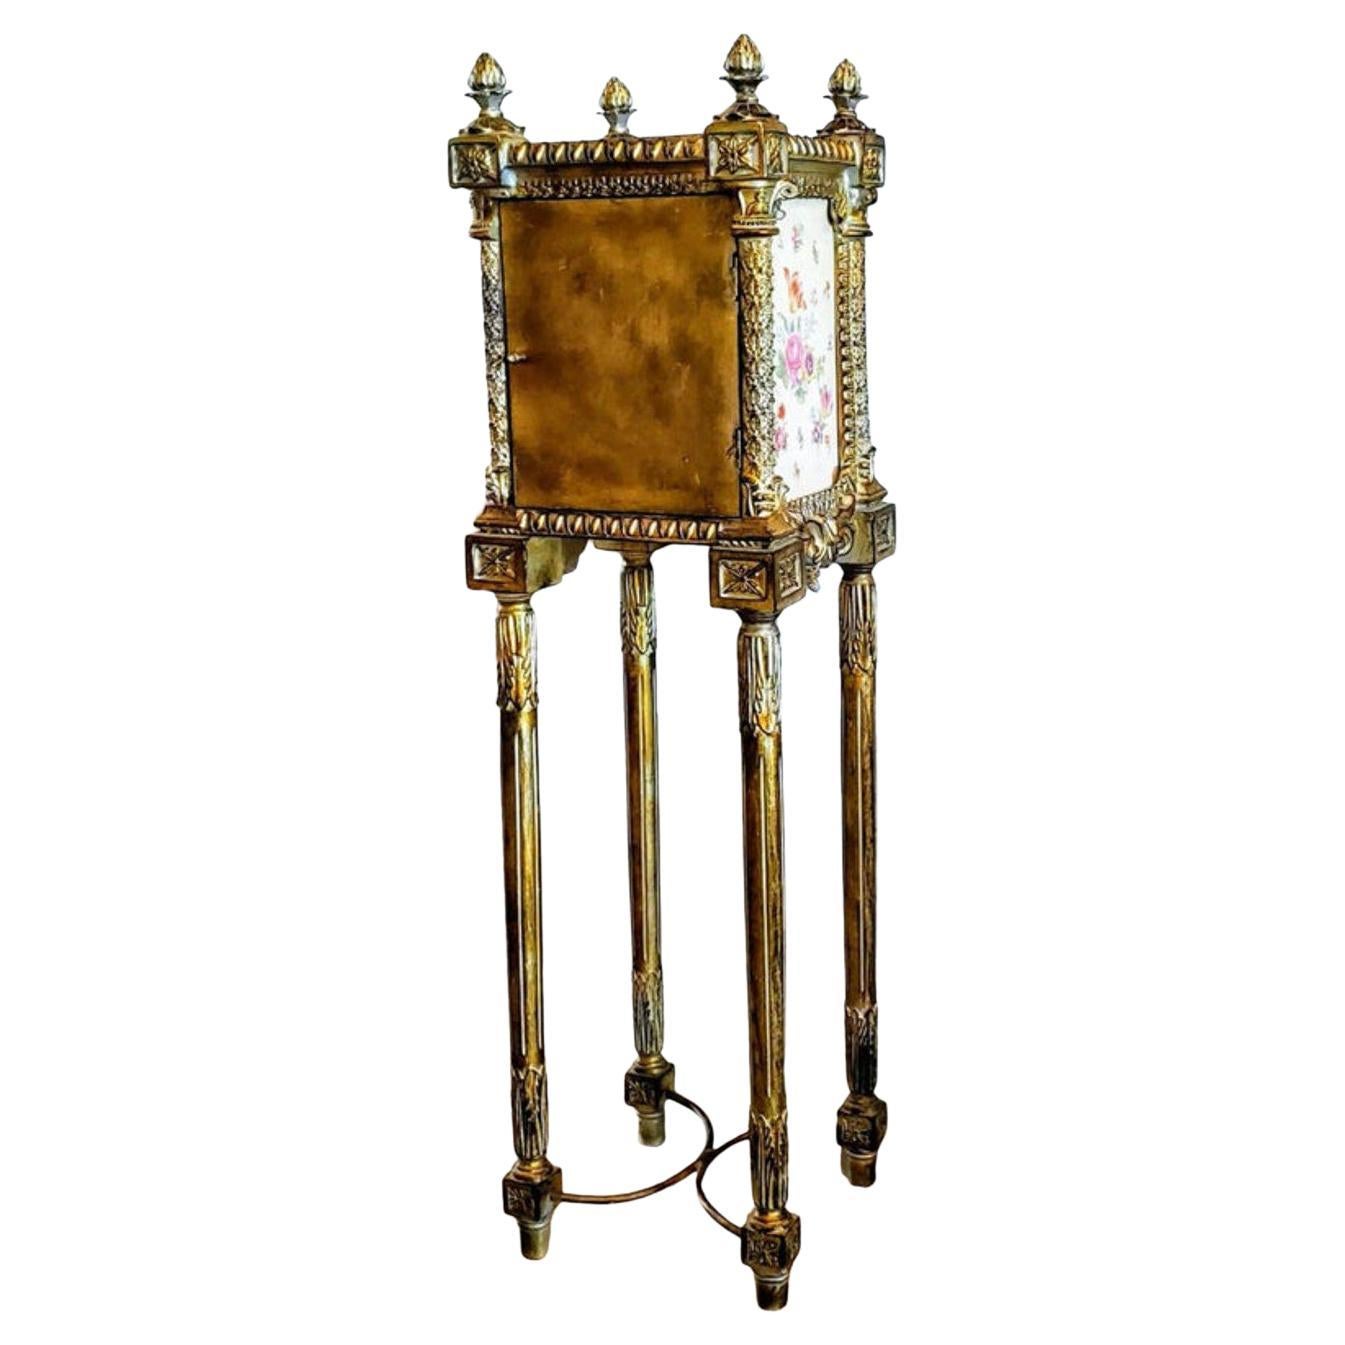 19th Century French Gilded Porcelain Jewelry Cabinet, Manner of Martin Carlin